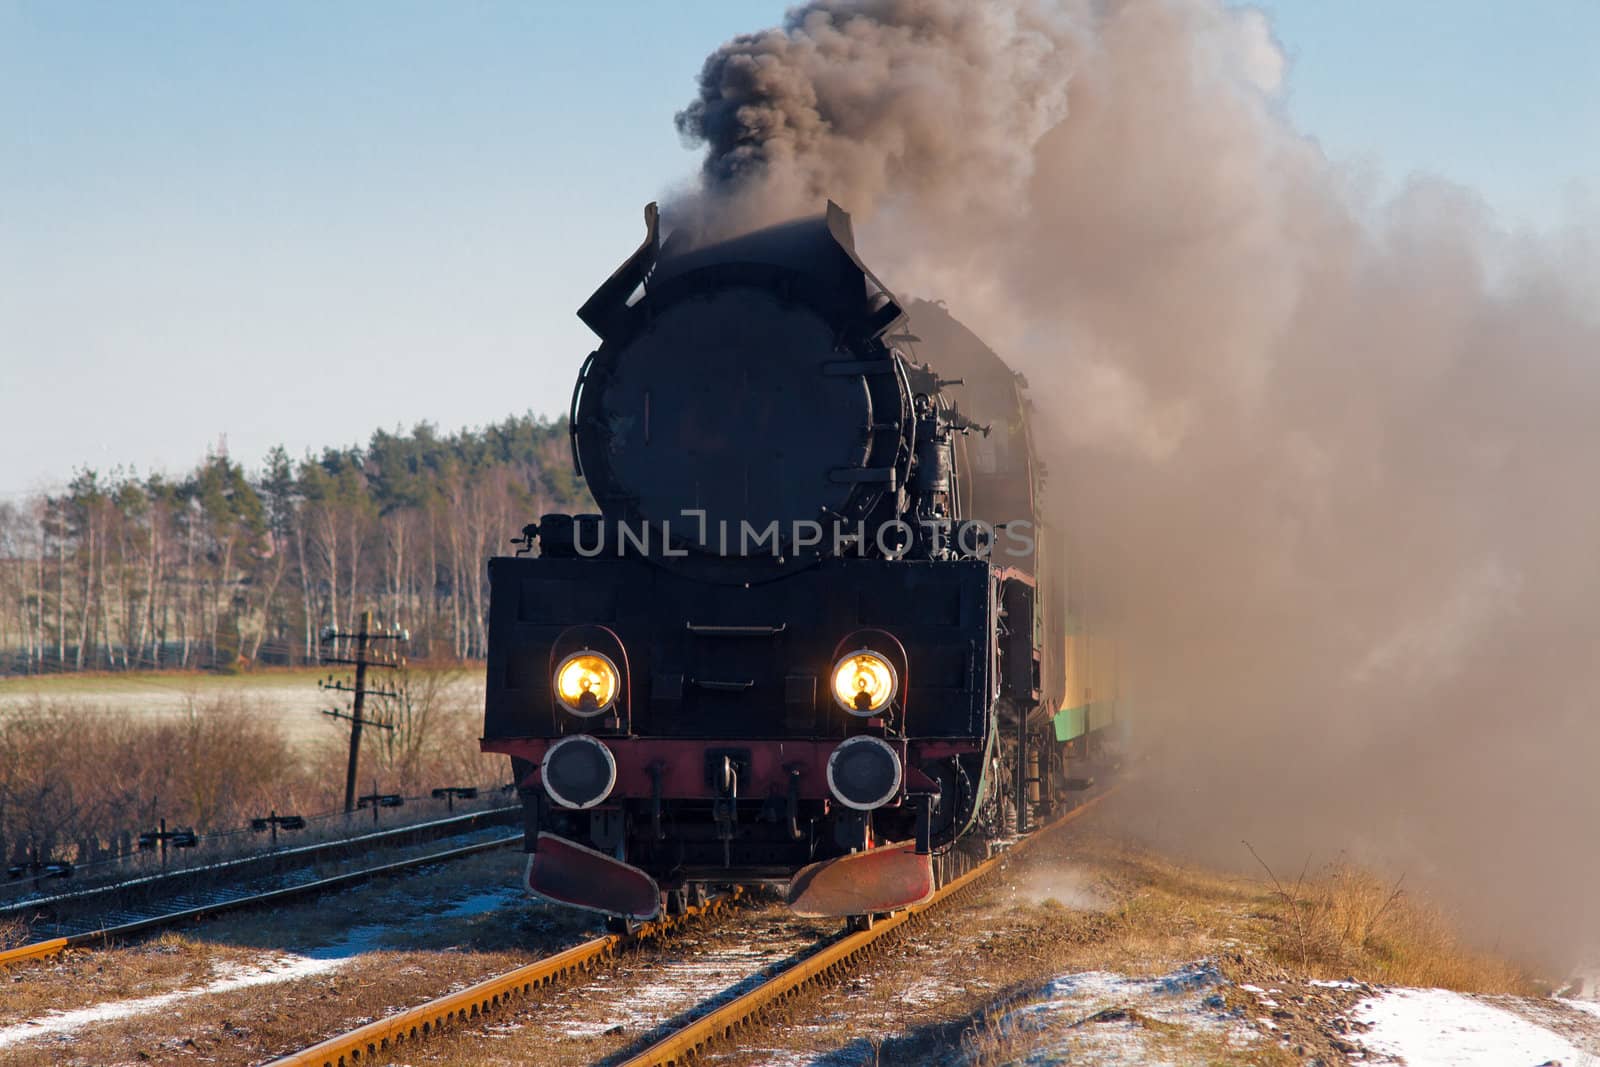 Vintage steam train passing through snowy countryside
